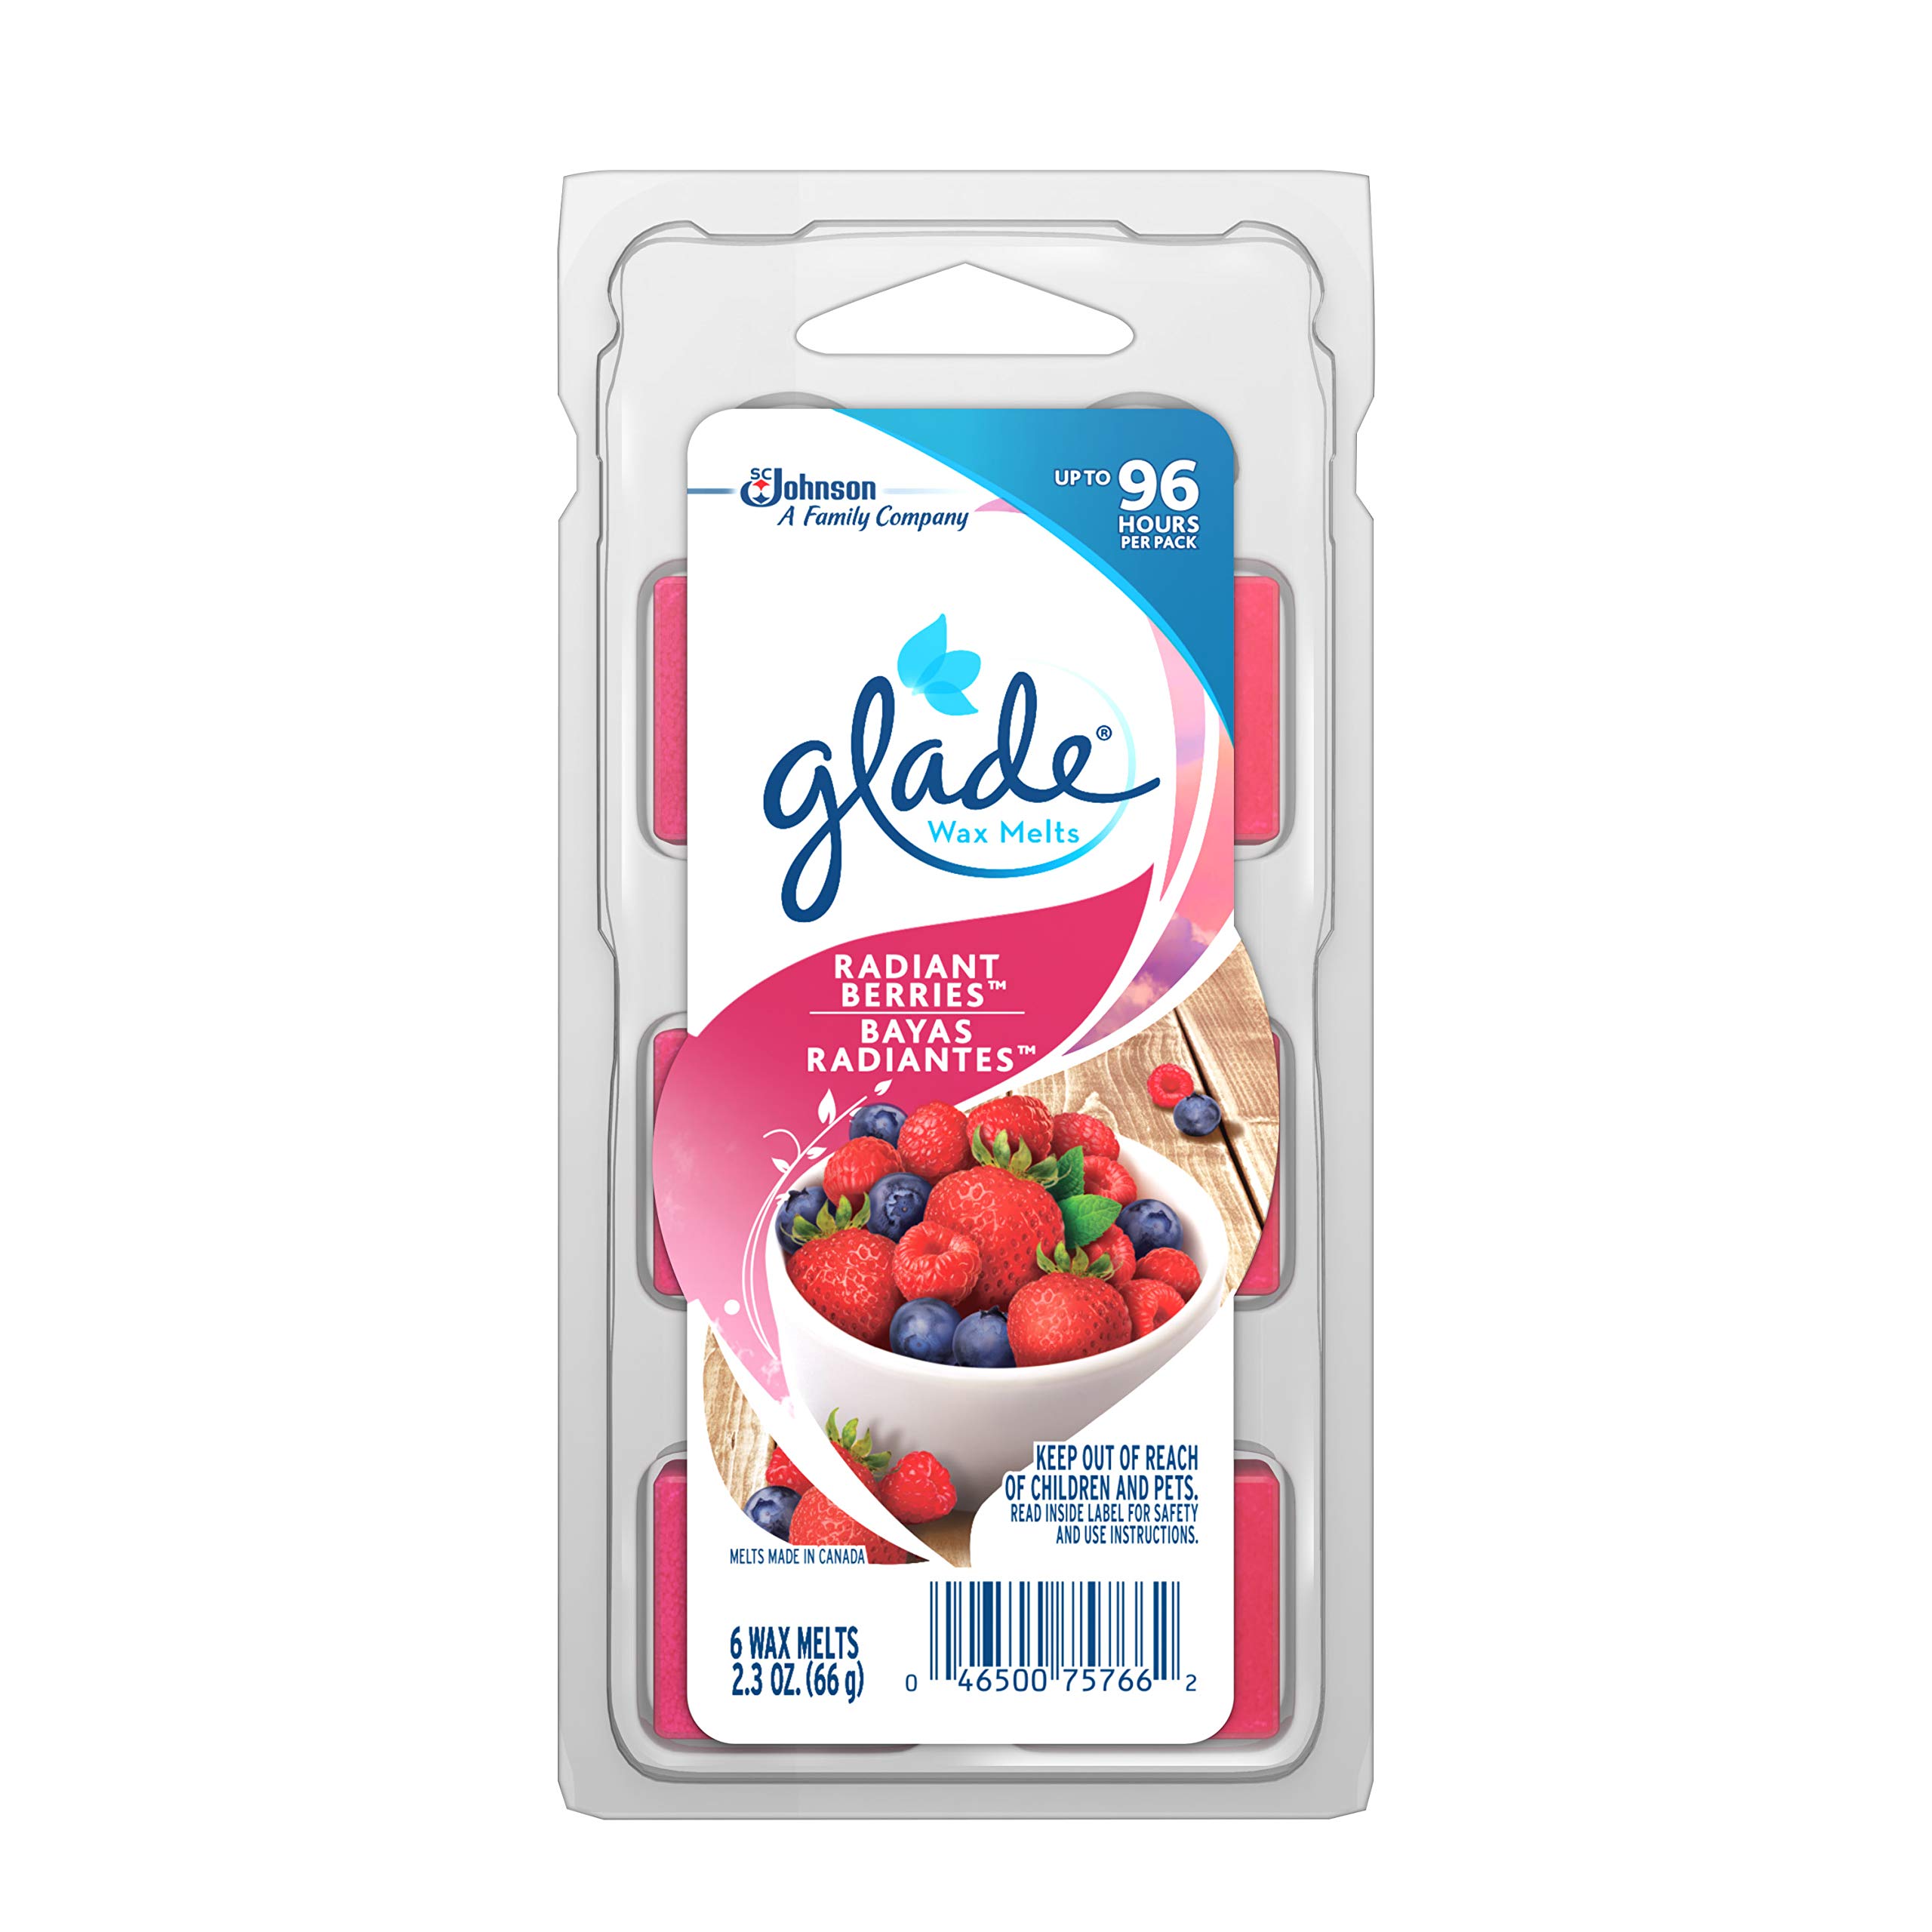 Glade Wax Melts Air Freshener, Scented Candles with Essential Oils for Home and Bathroom, Radiant Berries, 6 Count